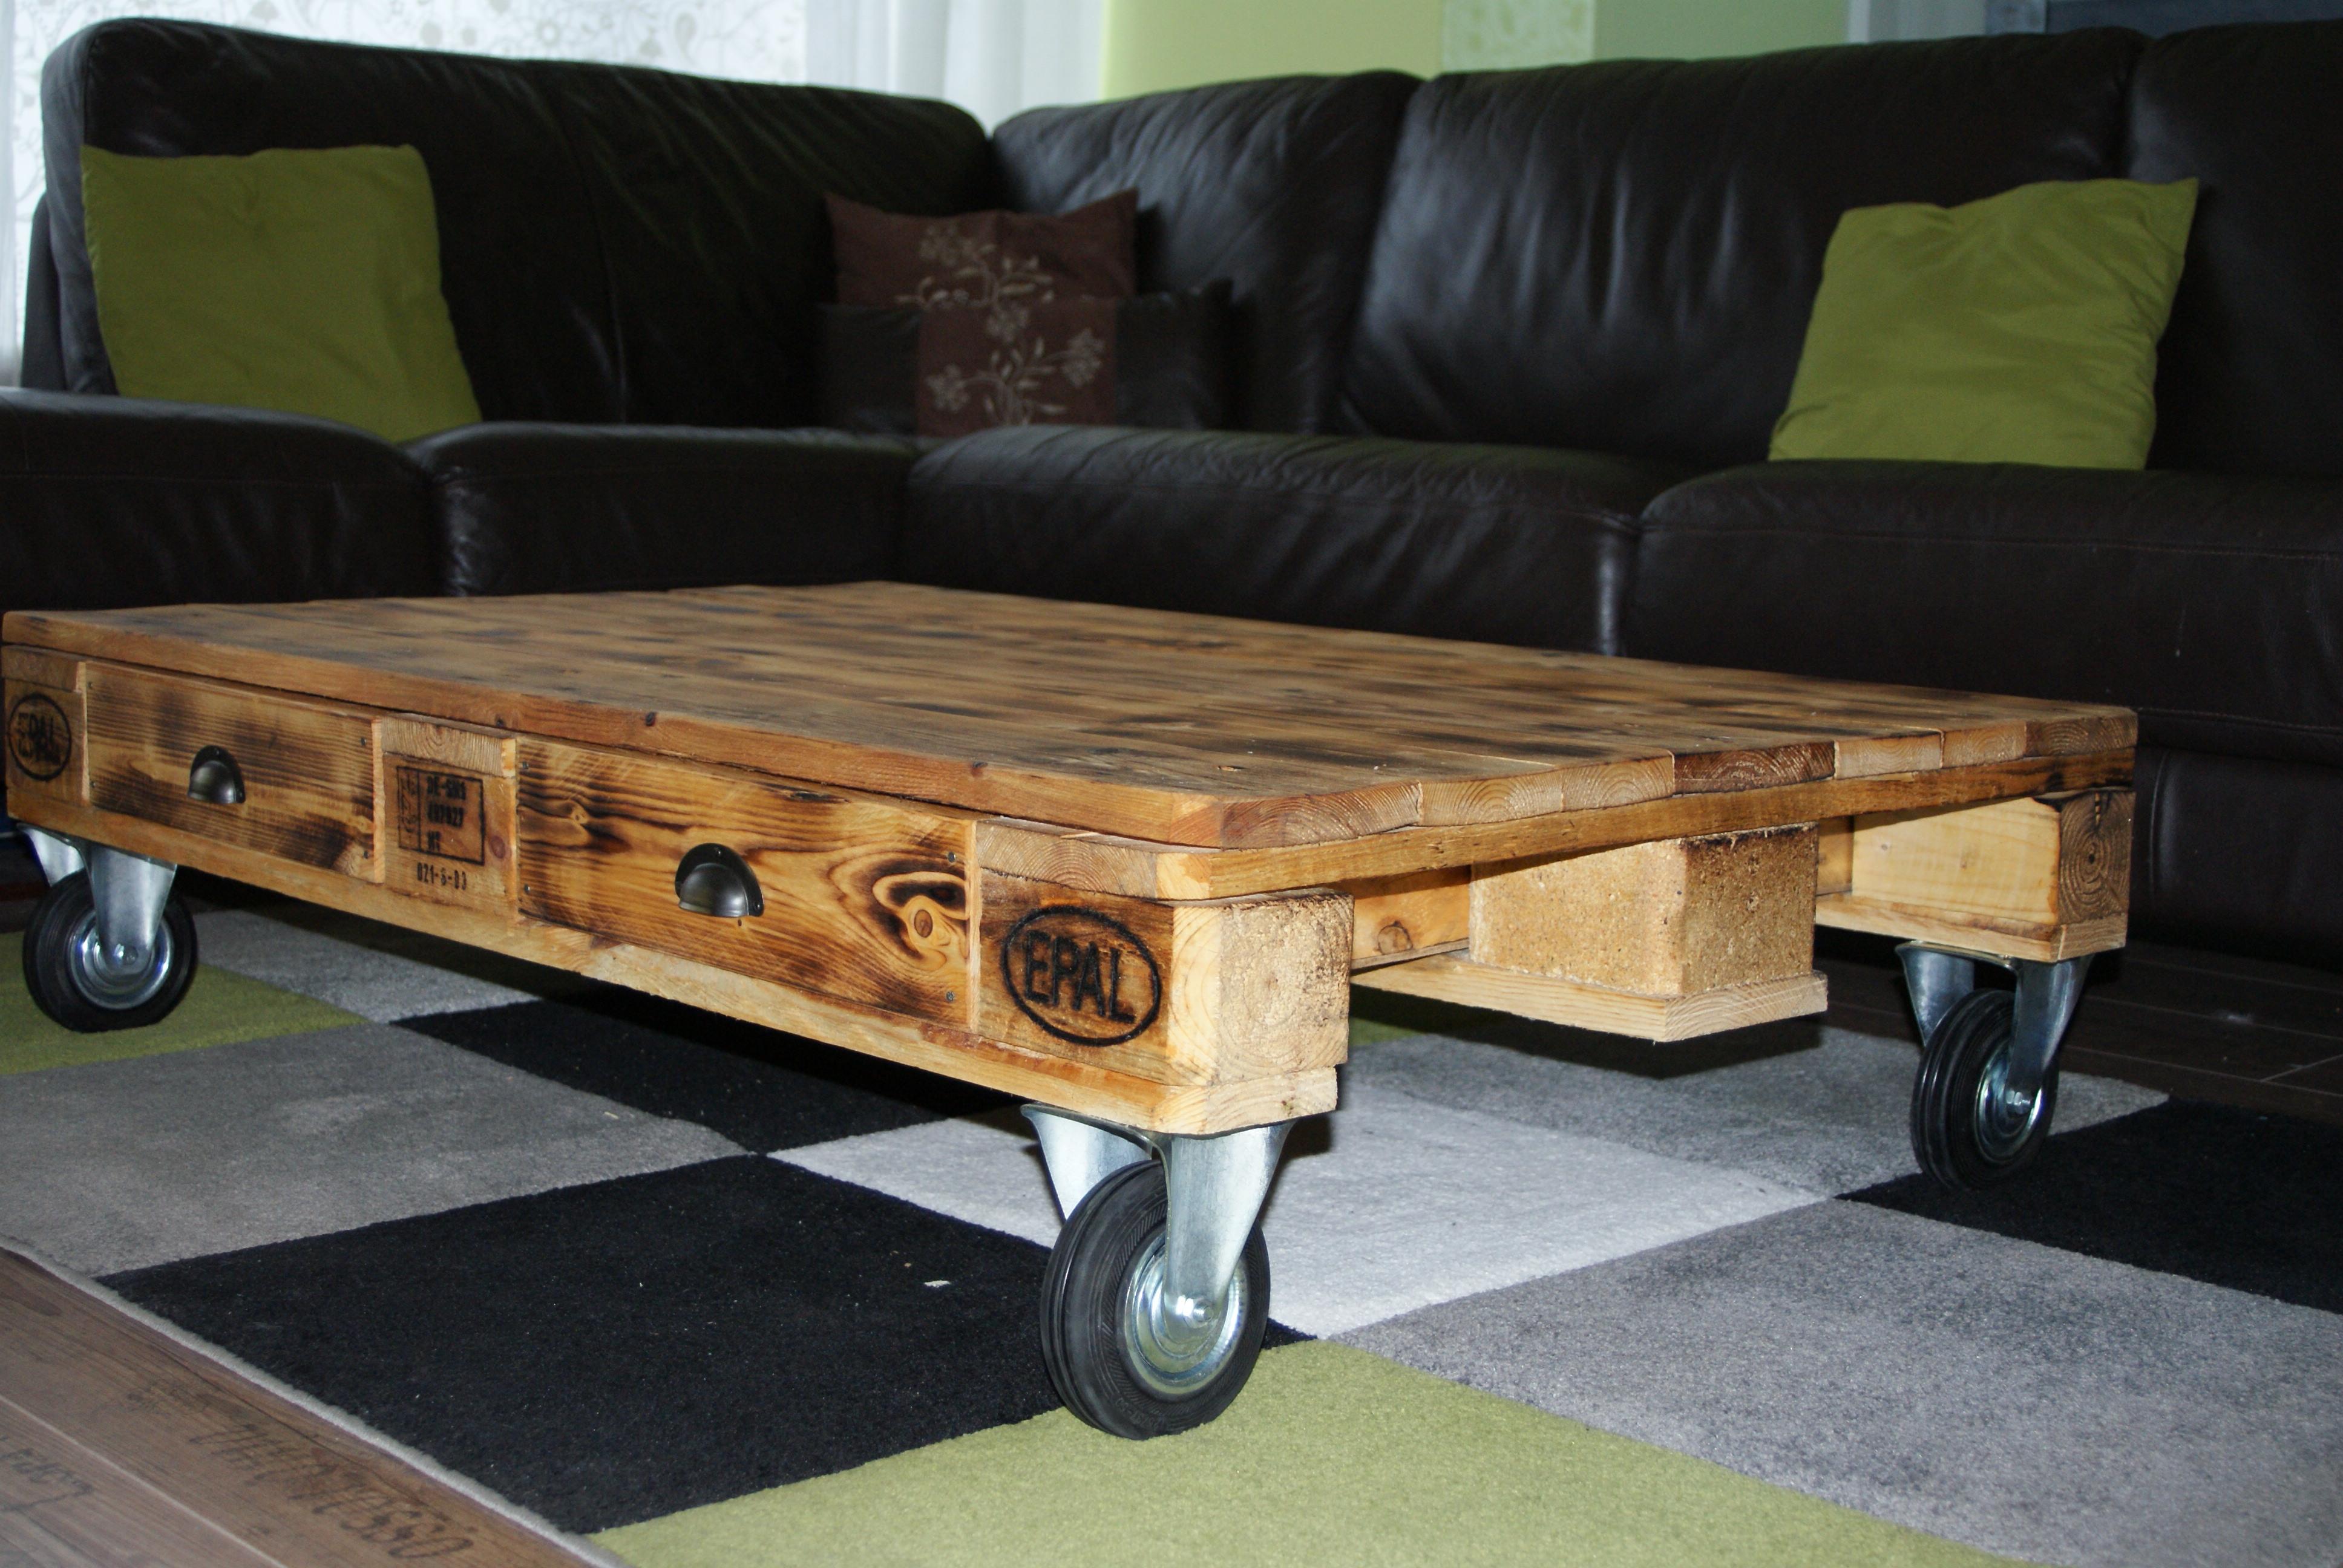 Couchtisch #diy #upcycling #recyceltesholz ©Wohnausstatter